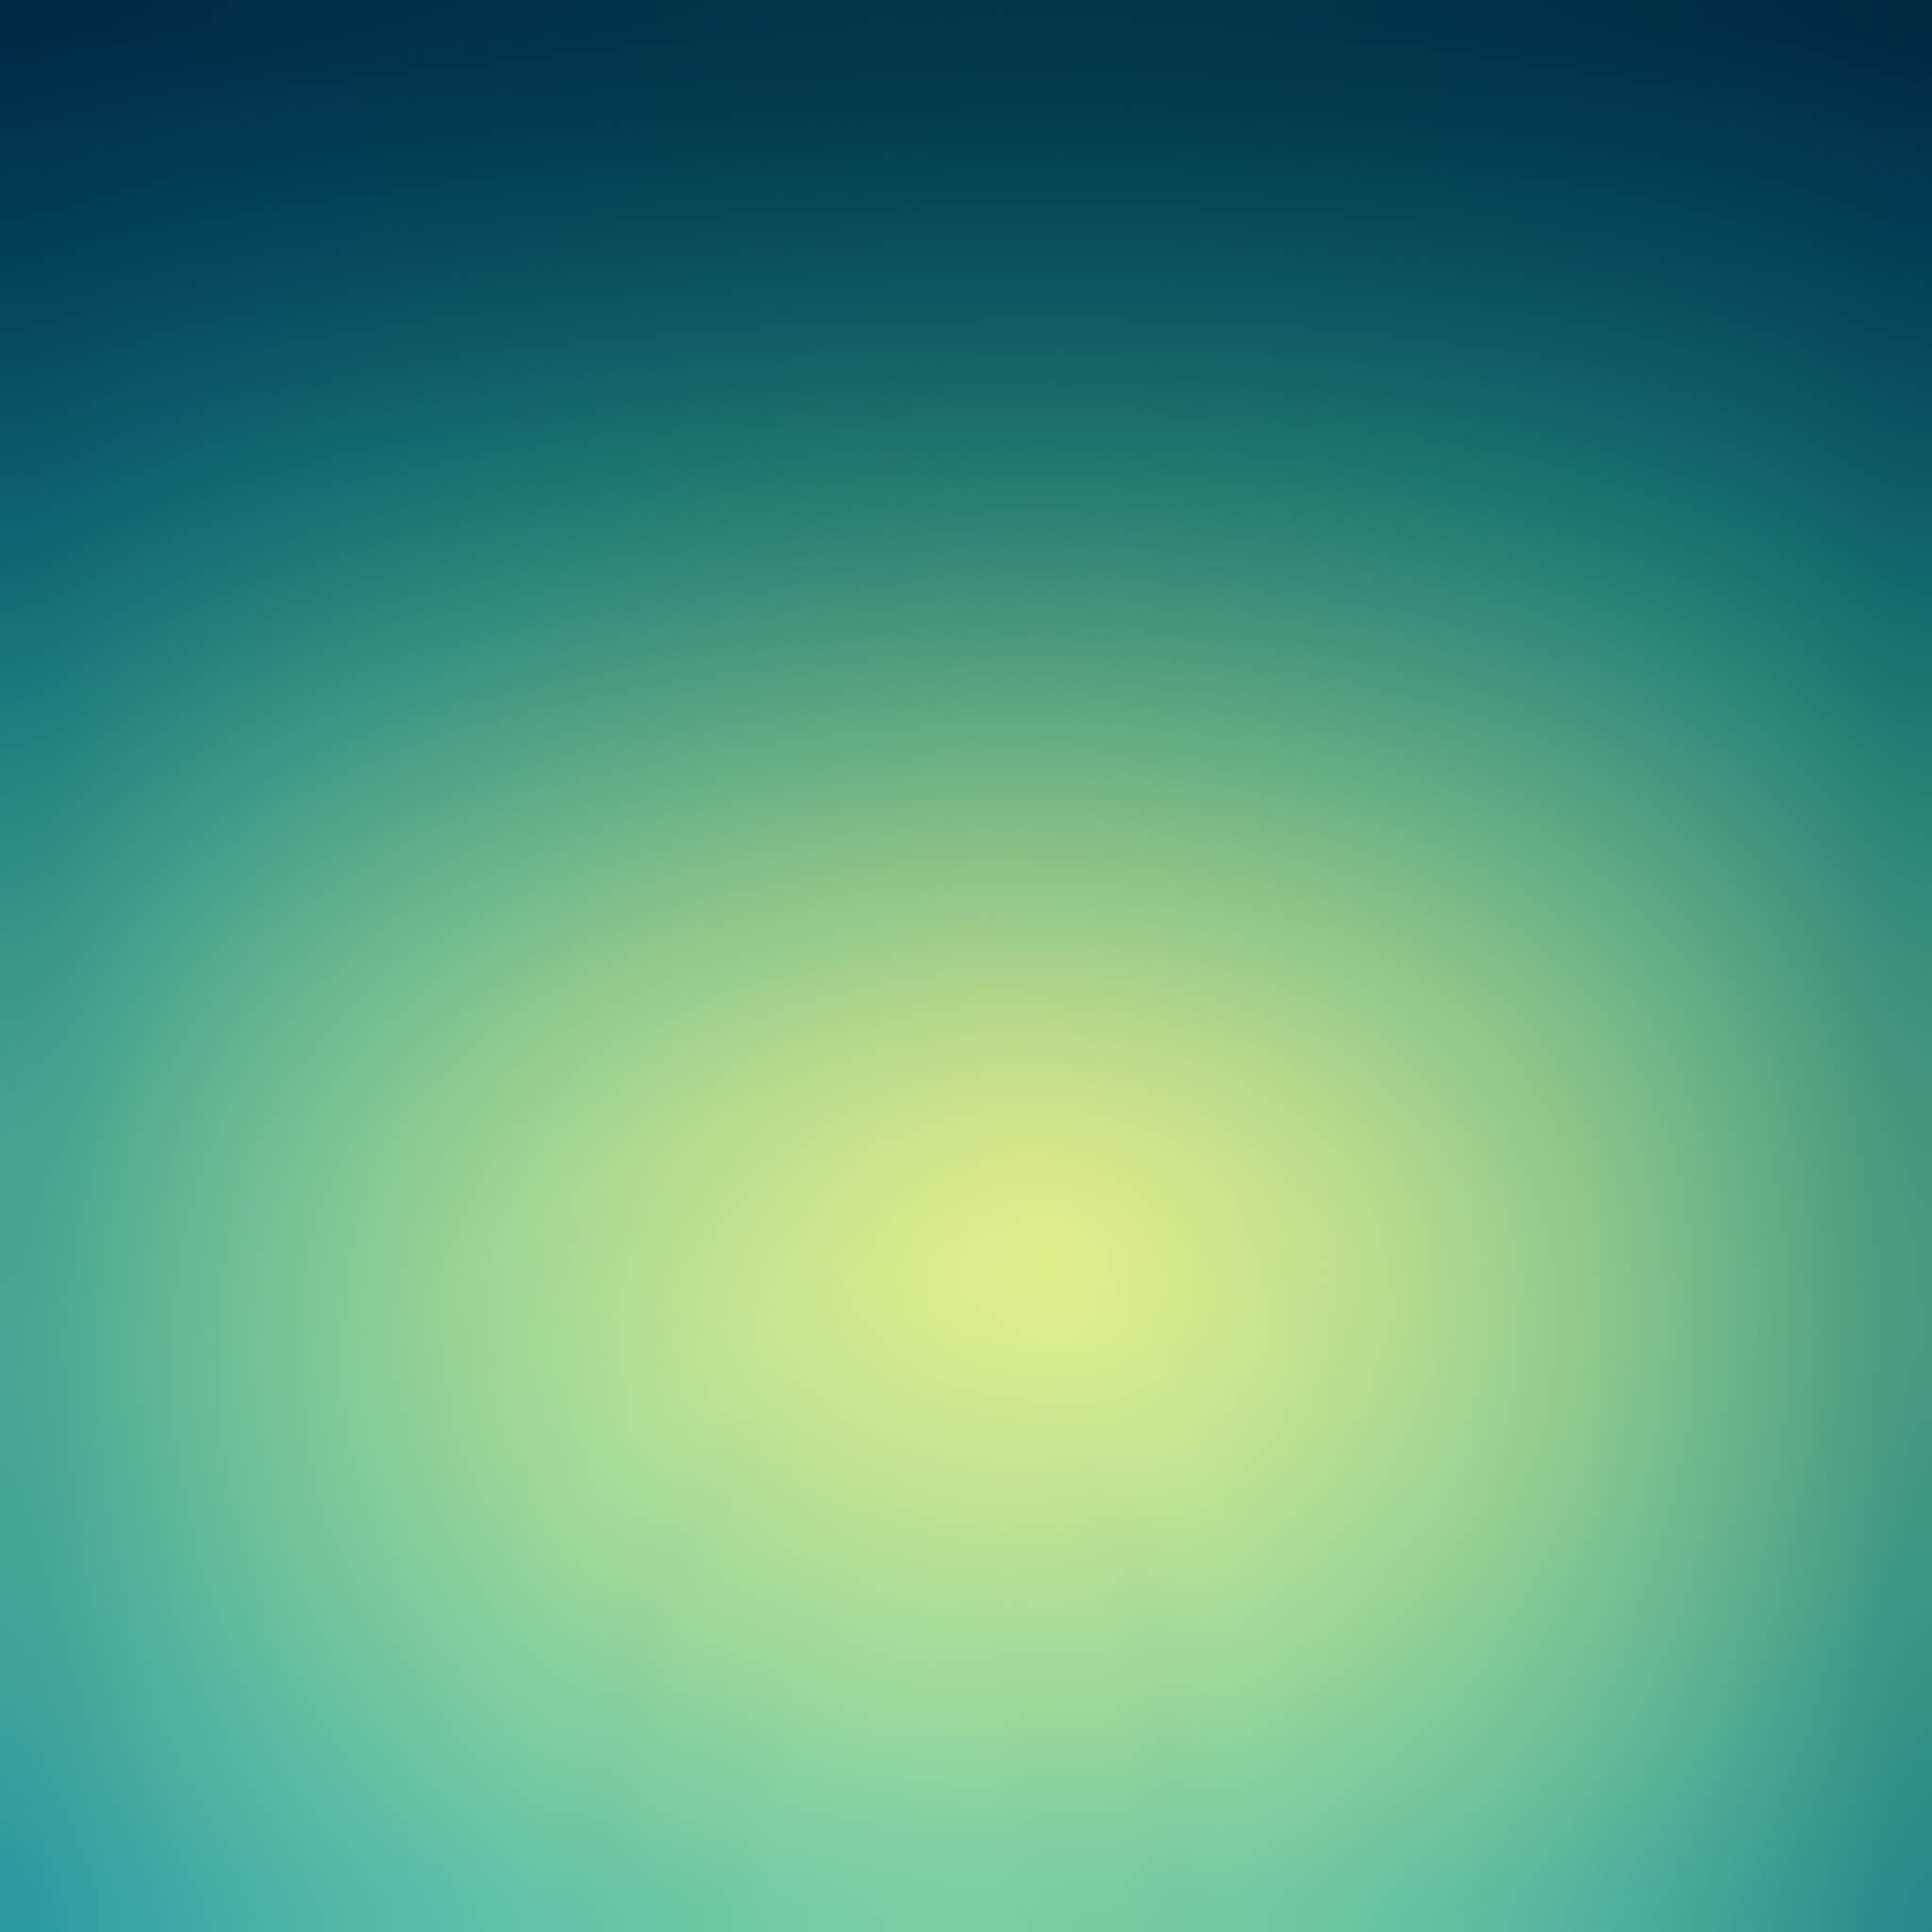 Subtle Glow iPad Wallpaper HD By merrile Share Things You